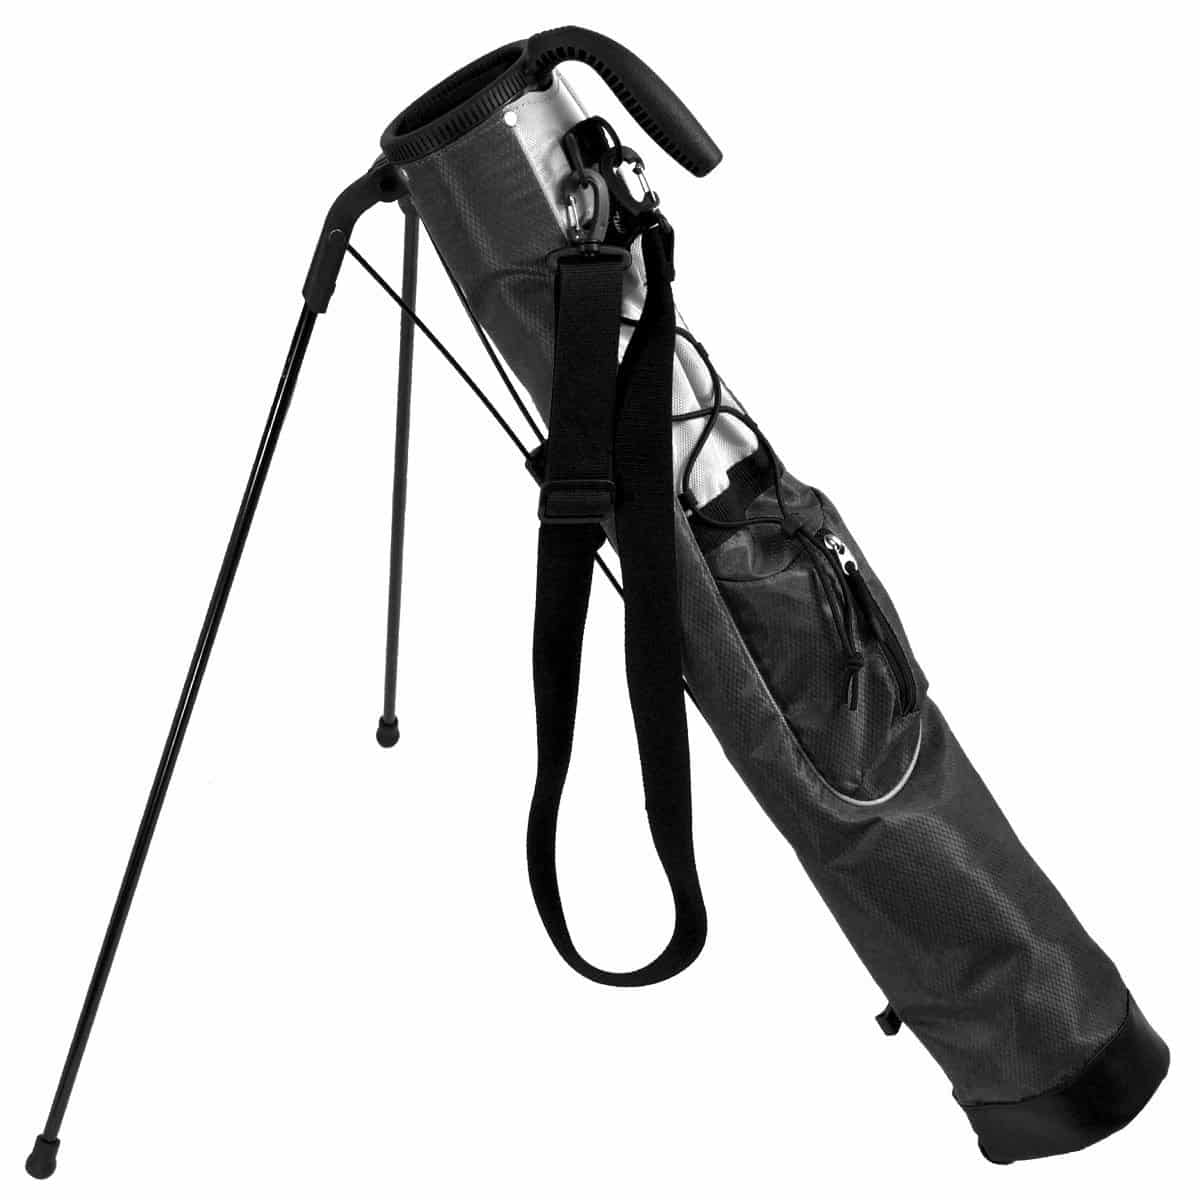 Top 10 Best Golf Bags for Sale in 2020